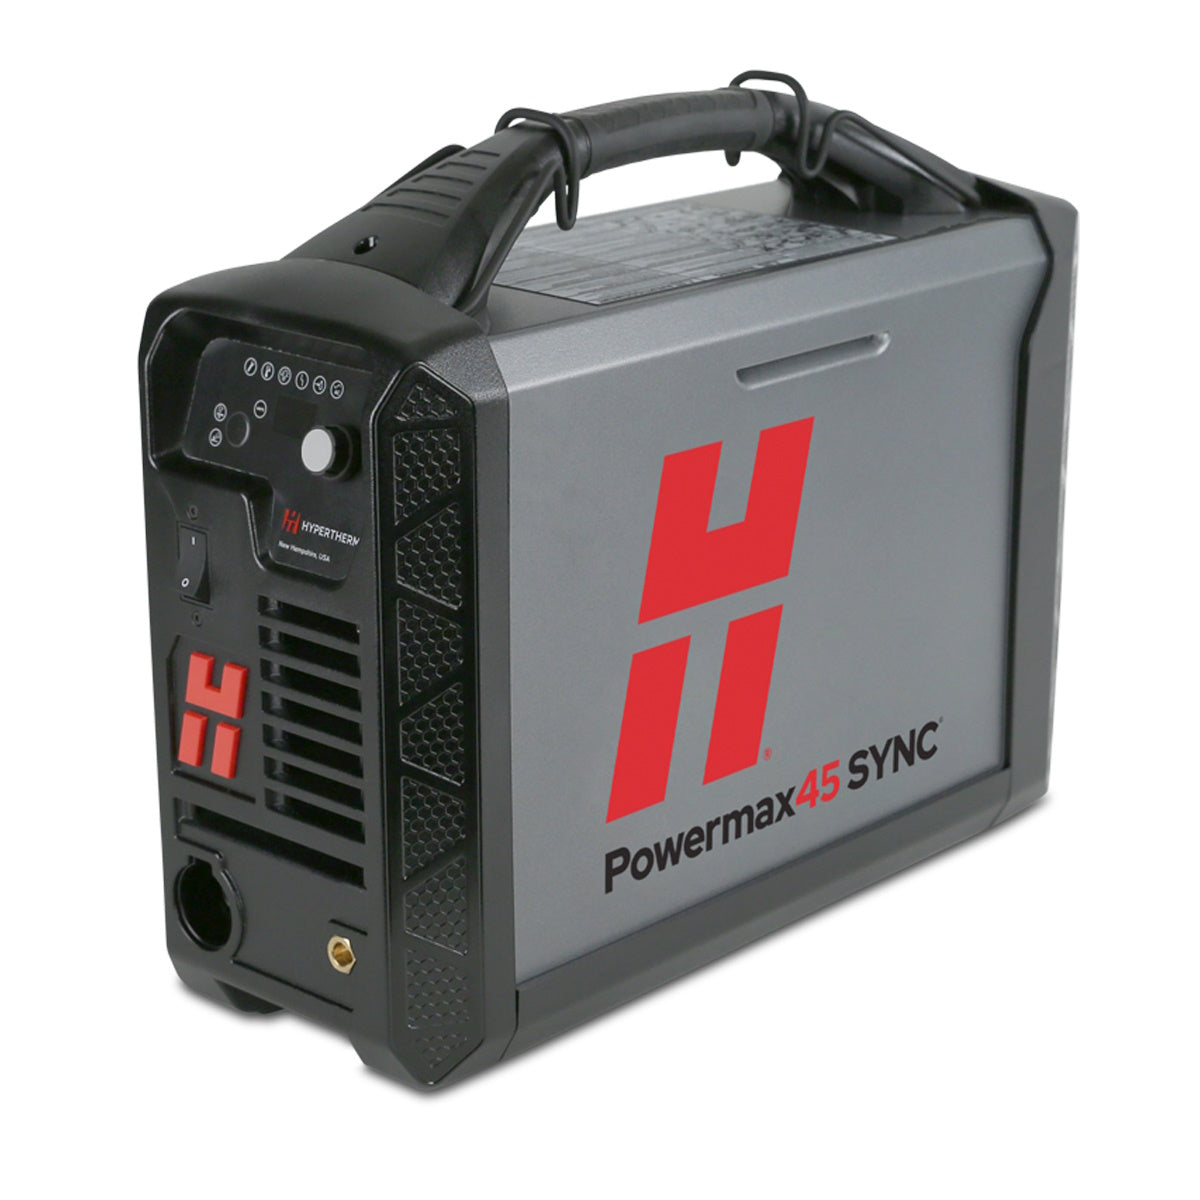 Hypertherm Powermax45 SYNC Plasma Cutter with 20ft 75° and 15° Hand Torches (088564)